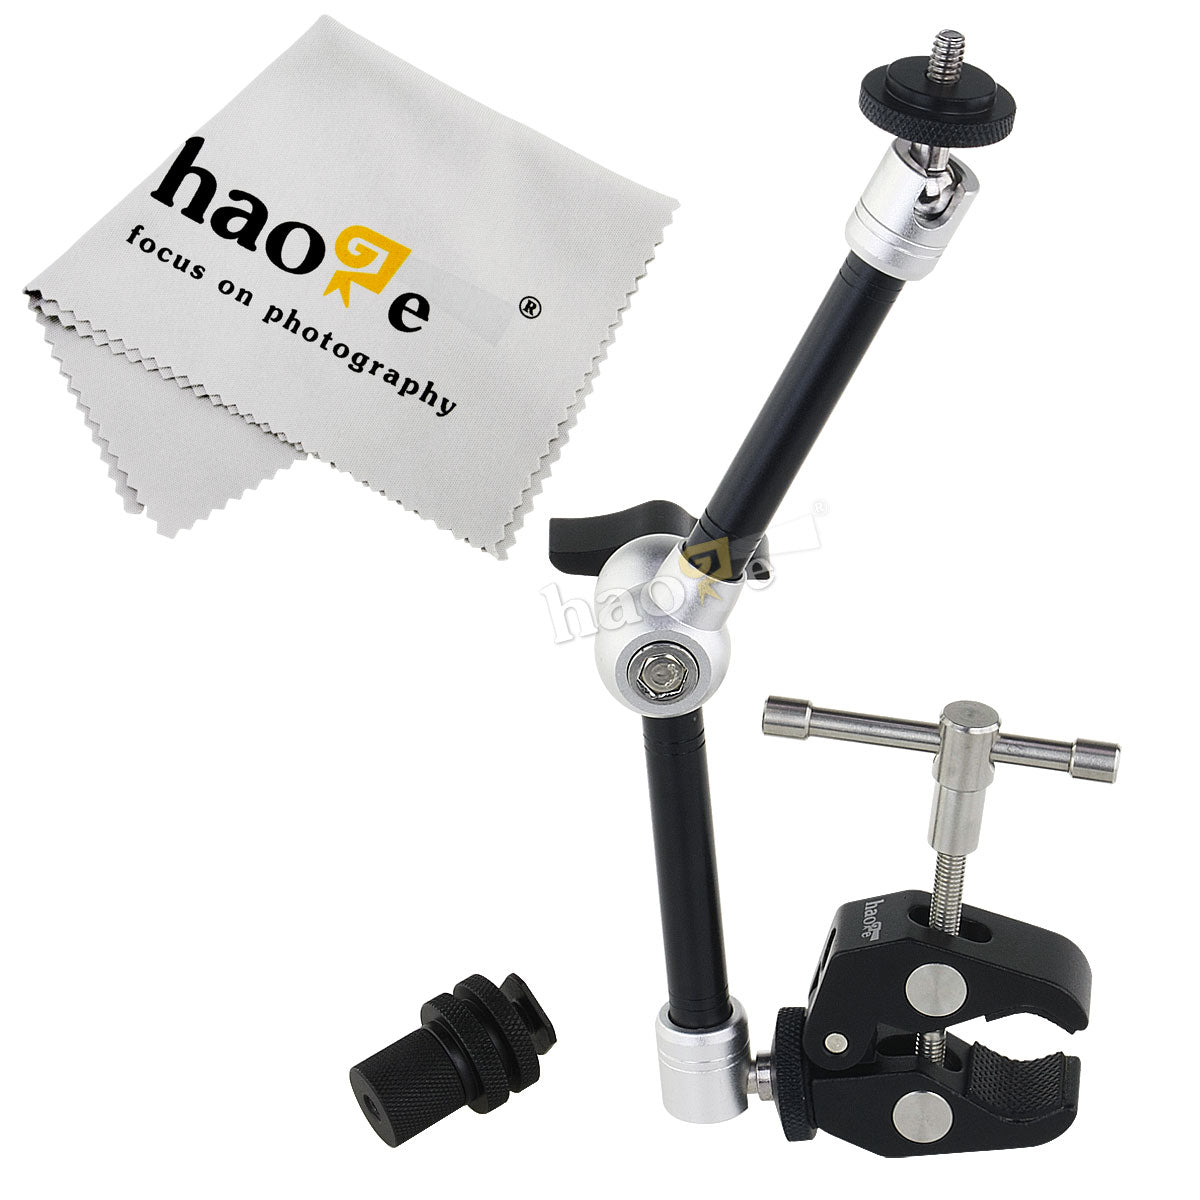 Haoge 11 inch Articulating Friction Magic Arm with Large Clamp Crab Pliers Clip for HDMI LCD Monitor LED Light DSLR Camera Video Tripod